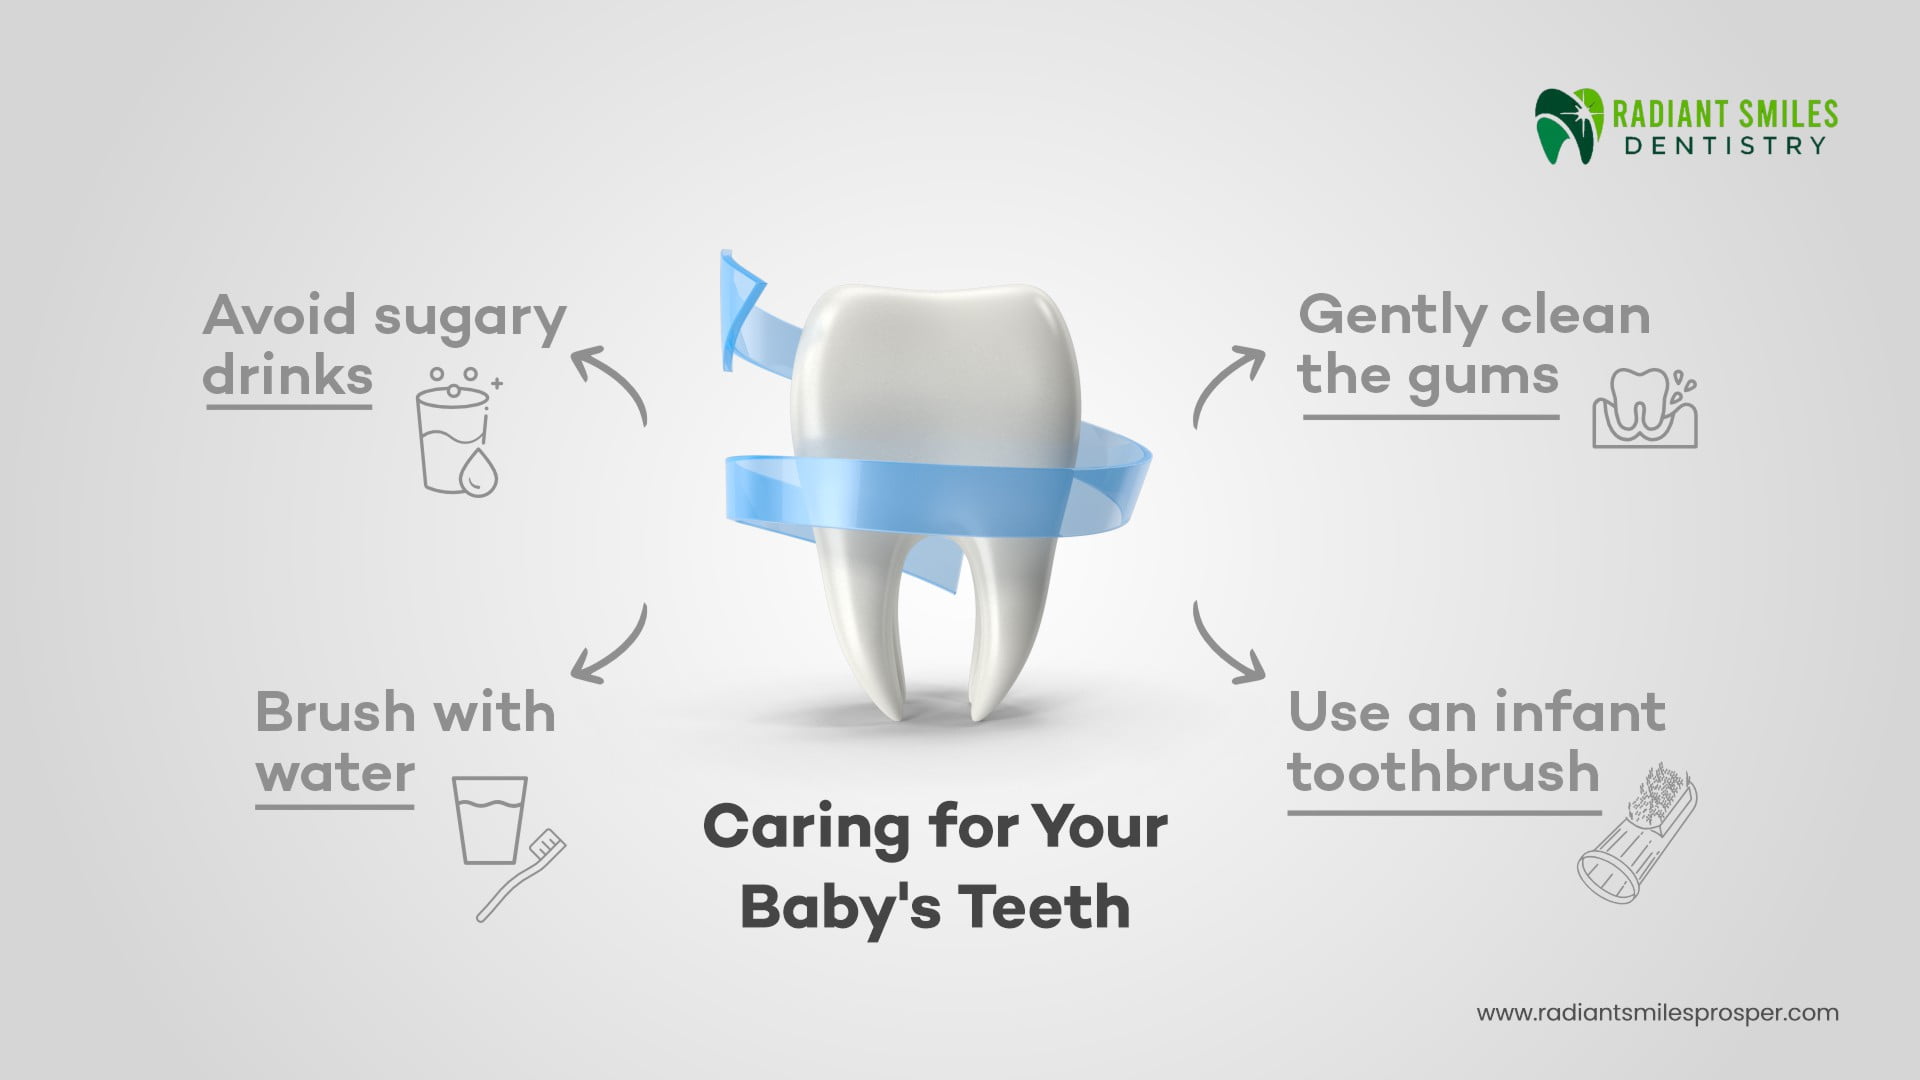 Caring for Baby's Teeth